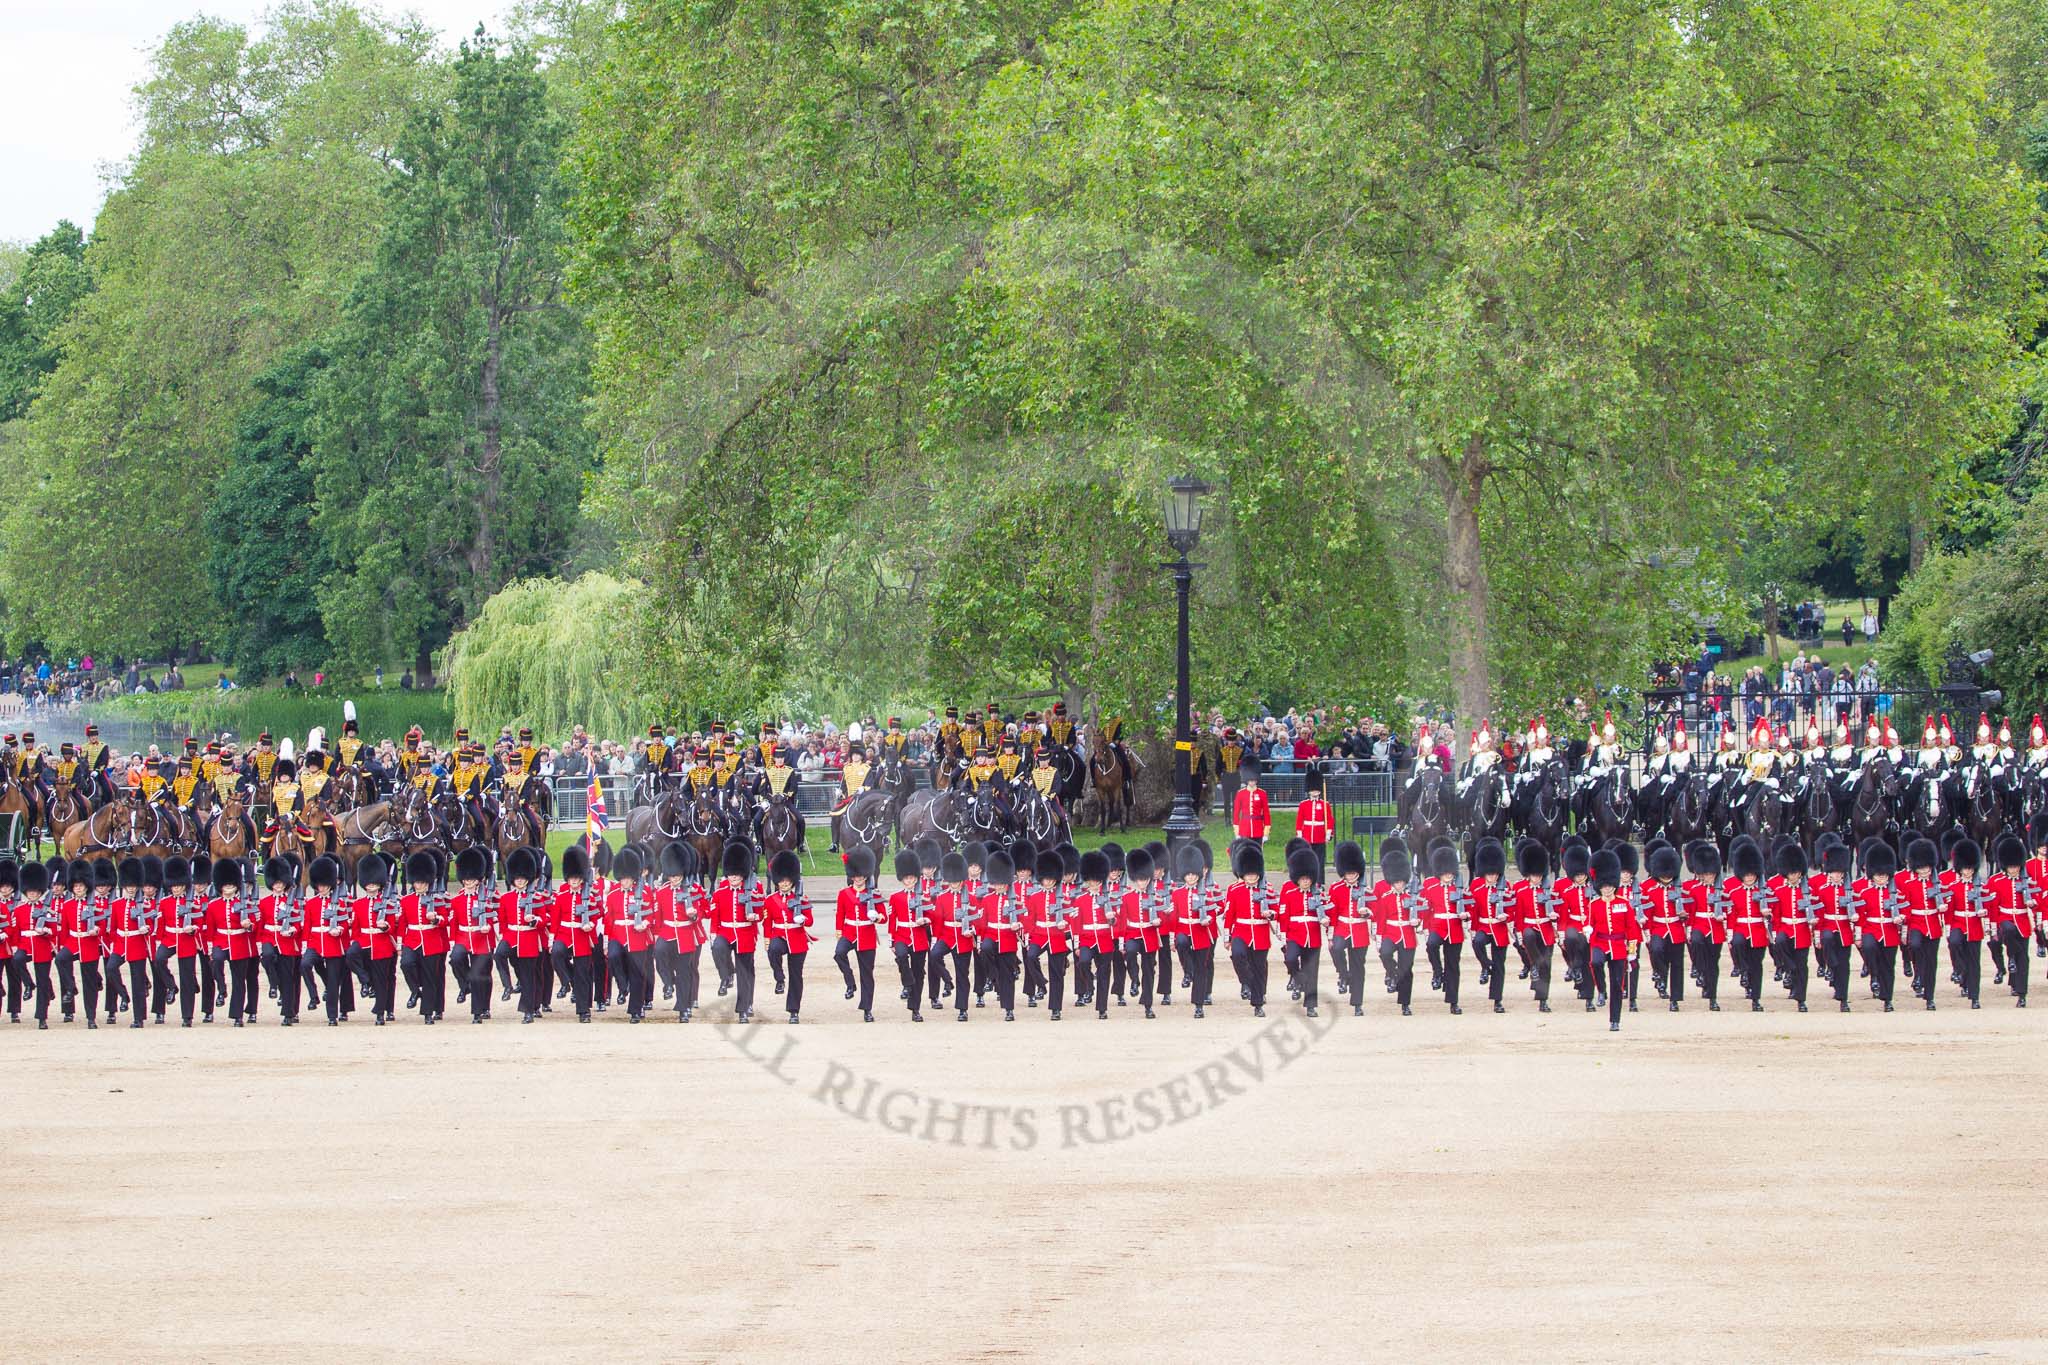 The Colonel's Review 2012: The March Past - The guards are changing their formation, turning left and forming long double rows of guardsmen again. The gaps are now closed..
Horse Guards Parade, Westminster,
London SW1,

United Kingdom,
on 09 June 2012 at 11:47, image #359